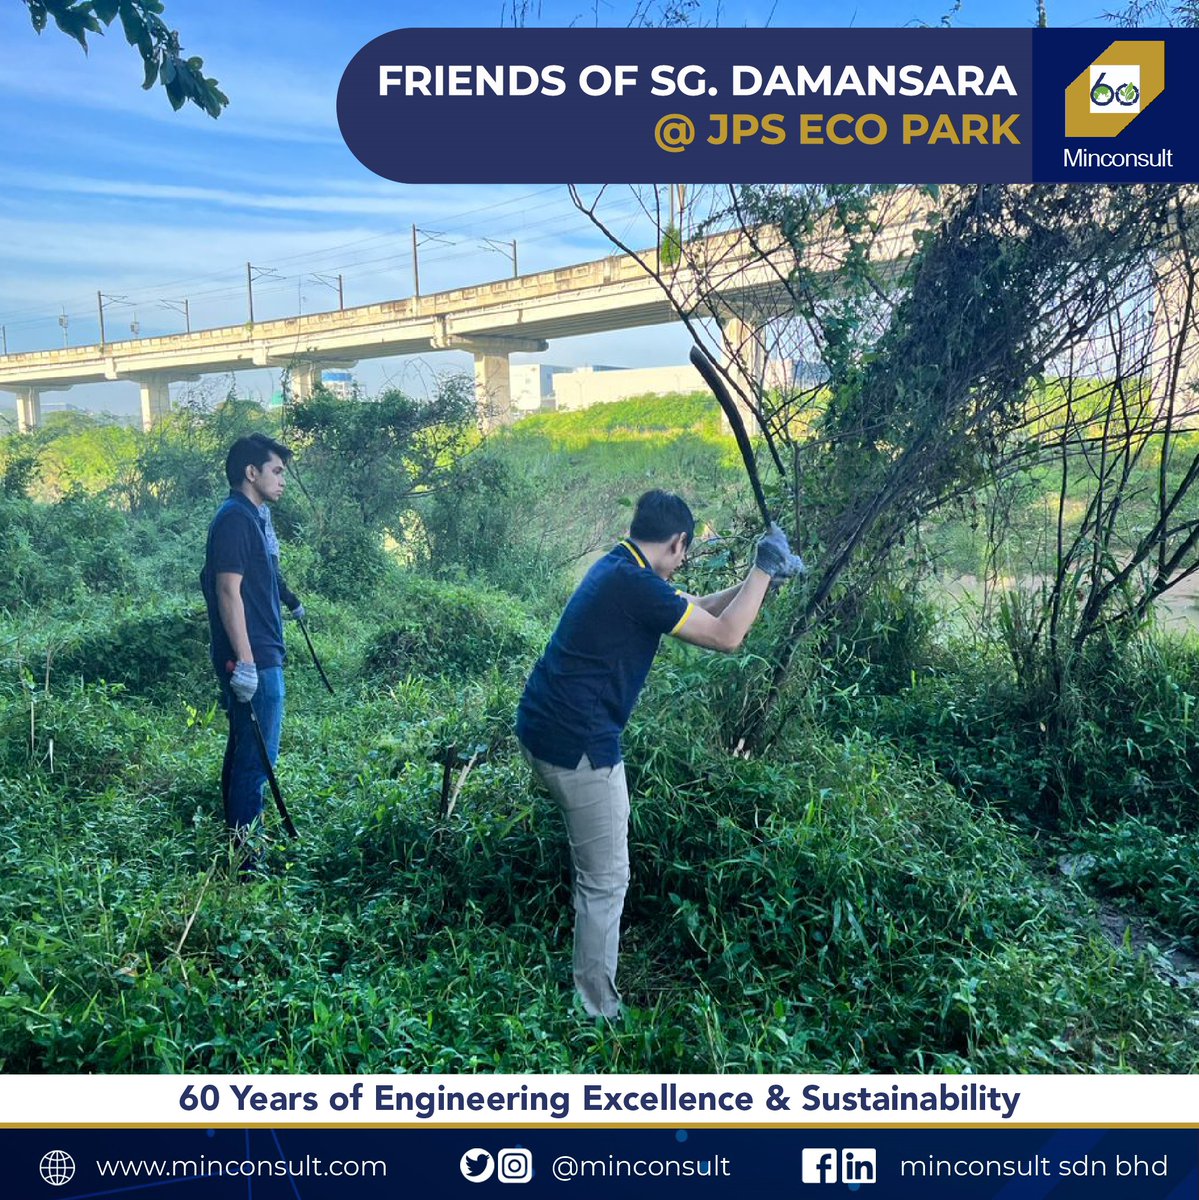 Representatives from different divisions of Minconsult continued clearing the riverbank of SG. Damansara as part of the Rivercare CSR program. The aim is to create awareness on the importance of the river ecosystem. 
#Minconsult #CSR #RiverCare #sustainability #preservenature